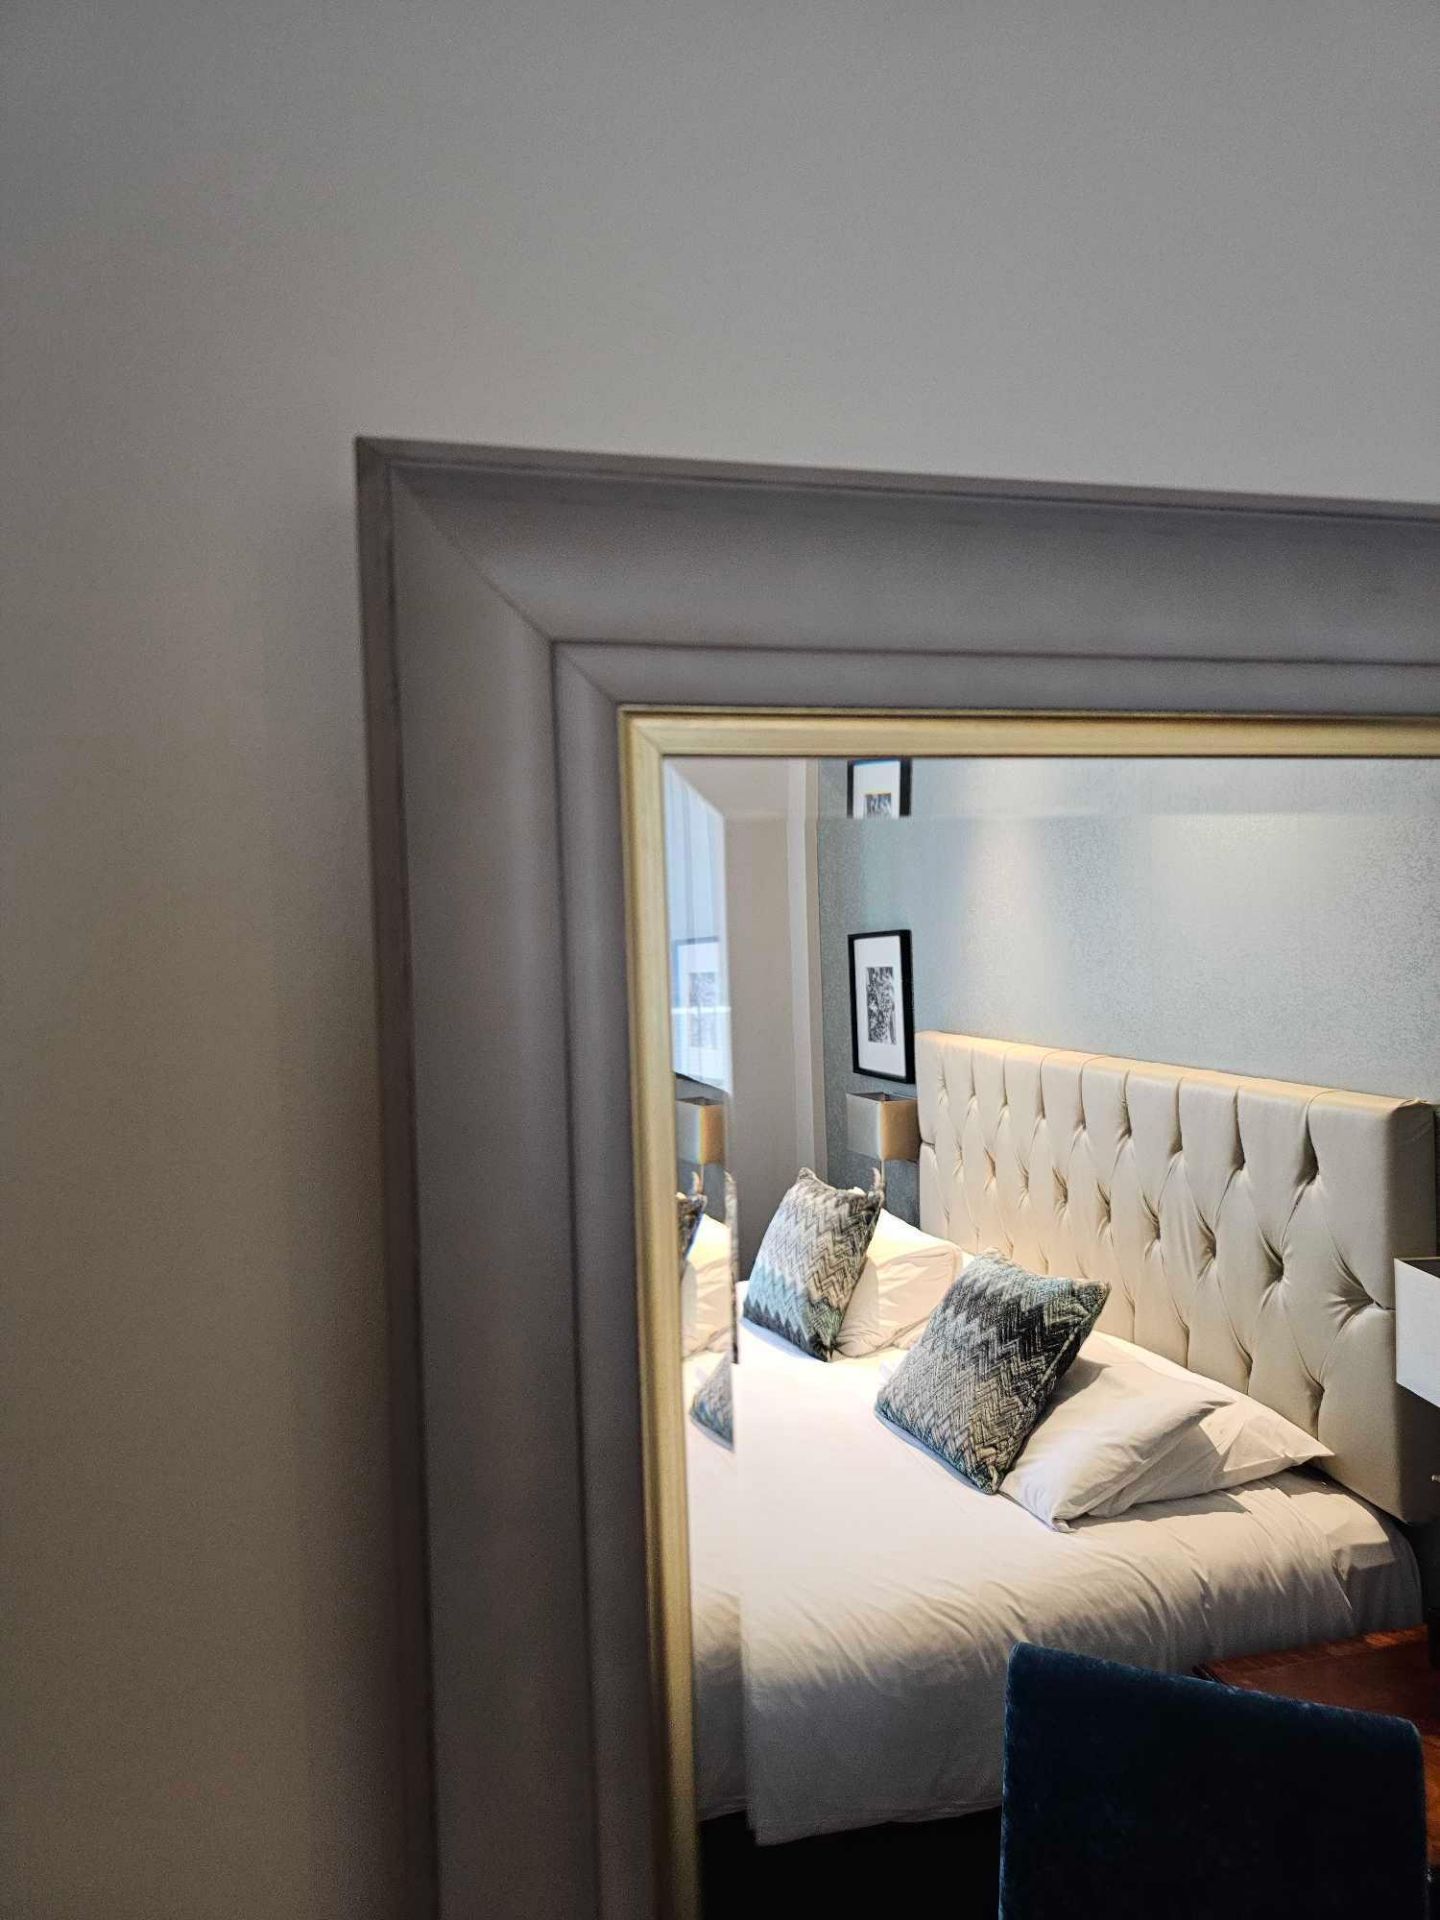 Modern Bevelled Accent Mirror Grey Timber Frame With Gold Trim Detailing 70 x 100cm (Loc: Room 129) - Image 2 of 2